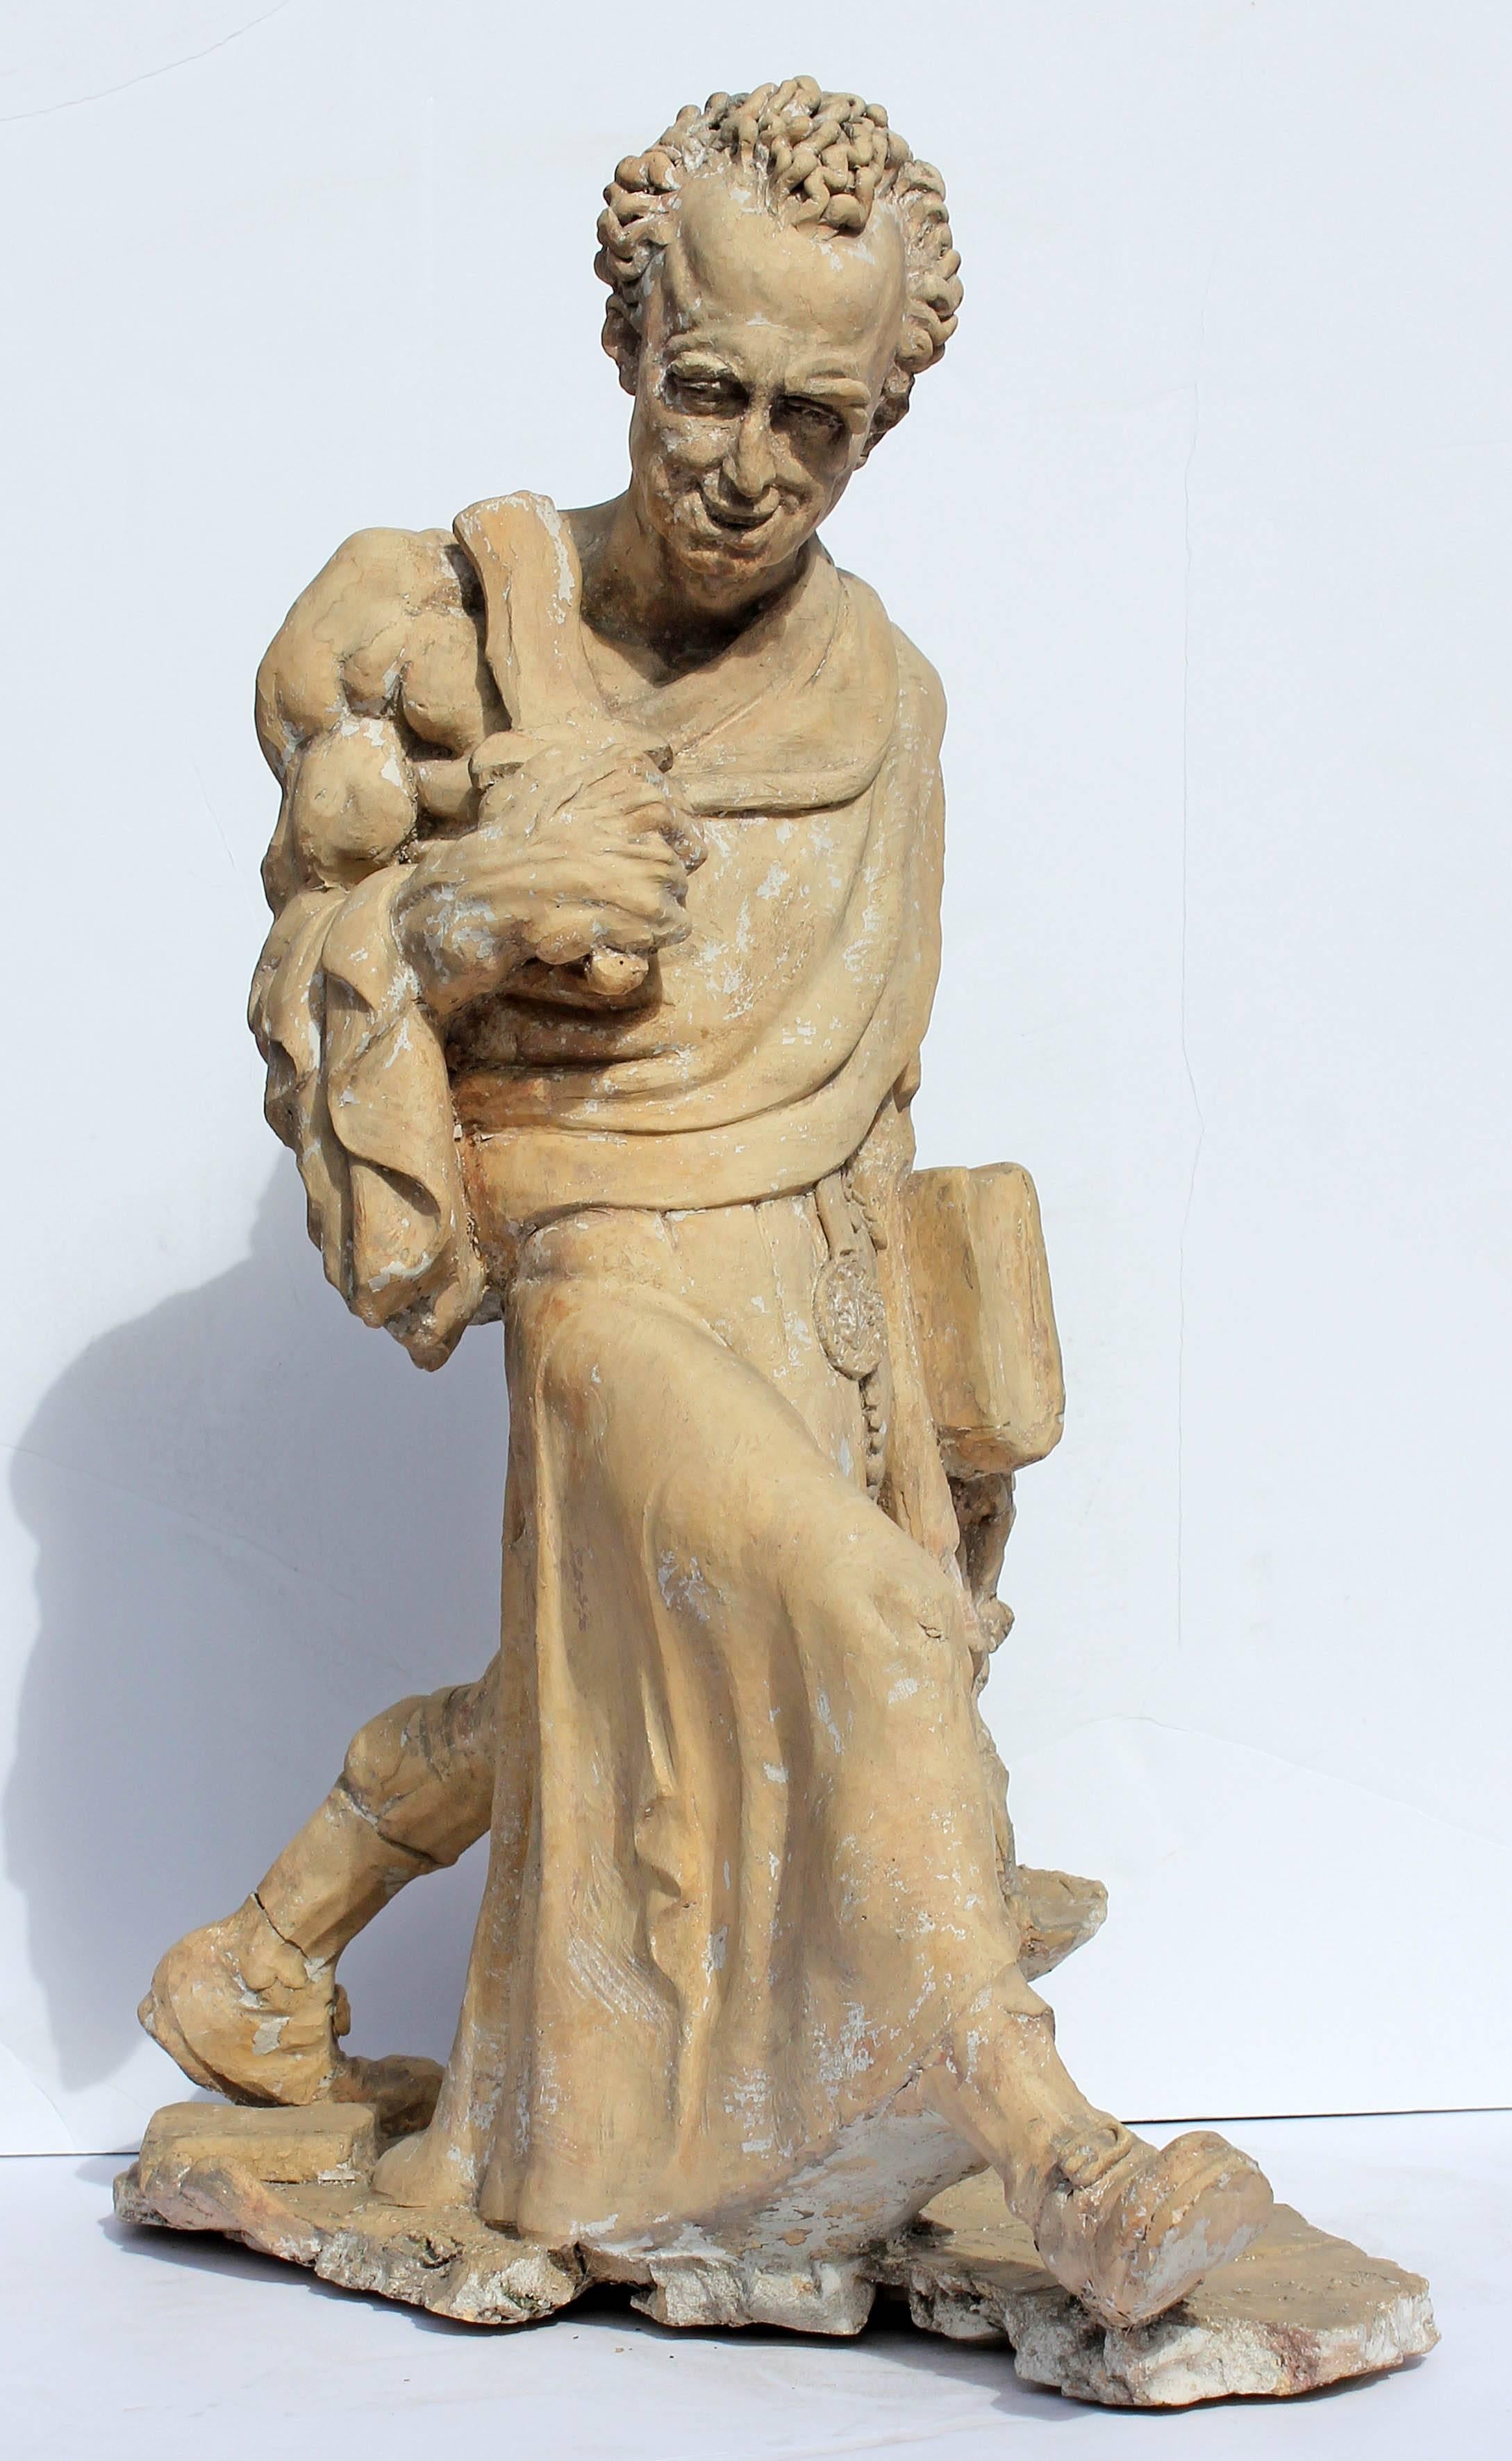 Original terracotta sculpture representing justice, law and order by Edgardo Simone. Figure carries scales of justice and the US constitution in one hand and a sword in the other hand. Signed Edgardo Simone and dated 1939.

Edgardo Simone